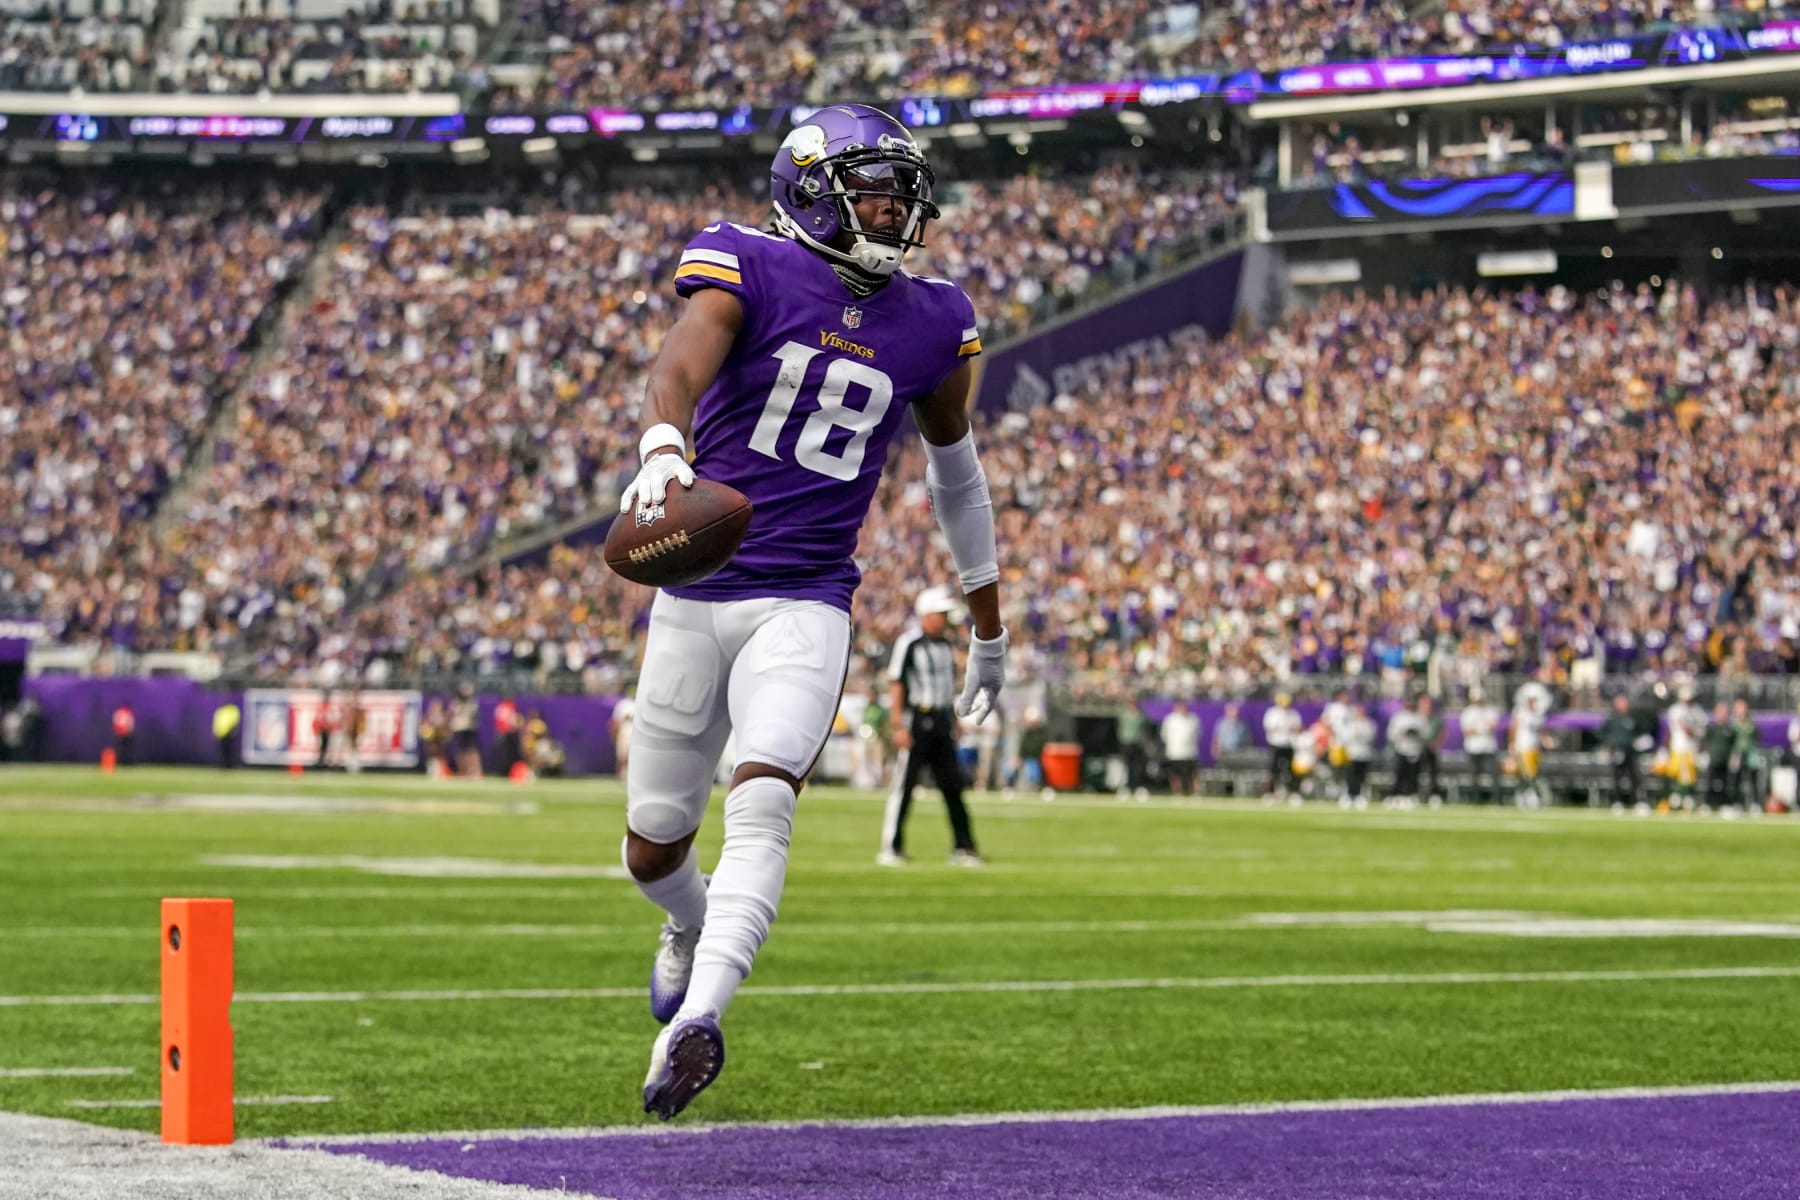 Vikings at Packers score, takeaways: How Green Bay nearly blew a